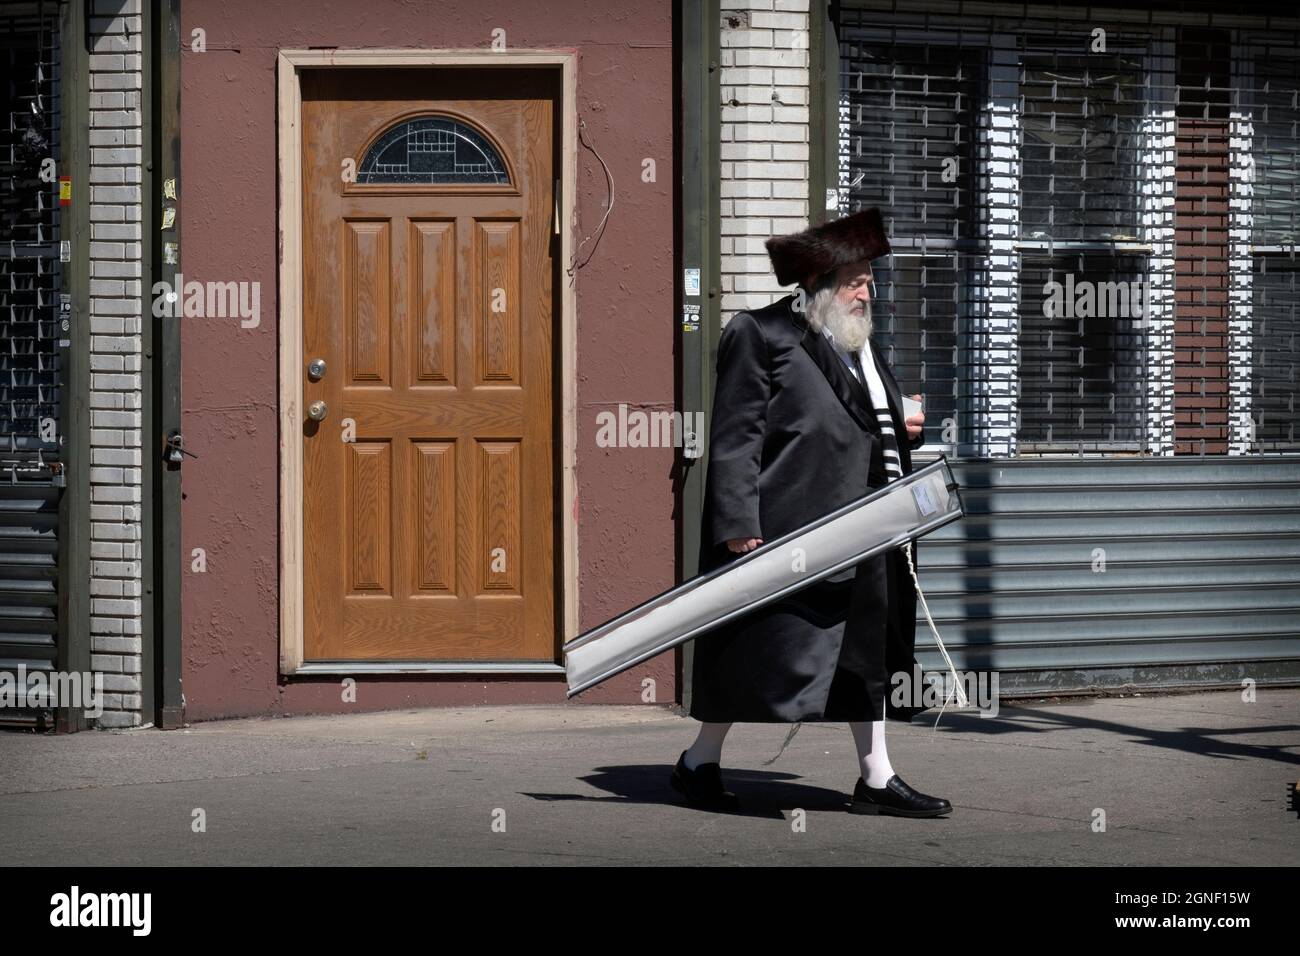 On Sukkos, an orthodox Jewish man walks from synagogue carrying an esrog & lulav and wearing a shtreimel. In Williamsburg, Brooklyn, New York City. Stock Photo